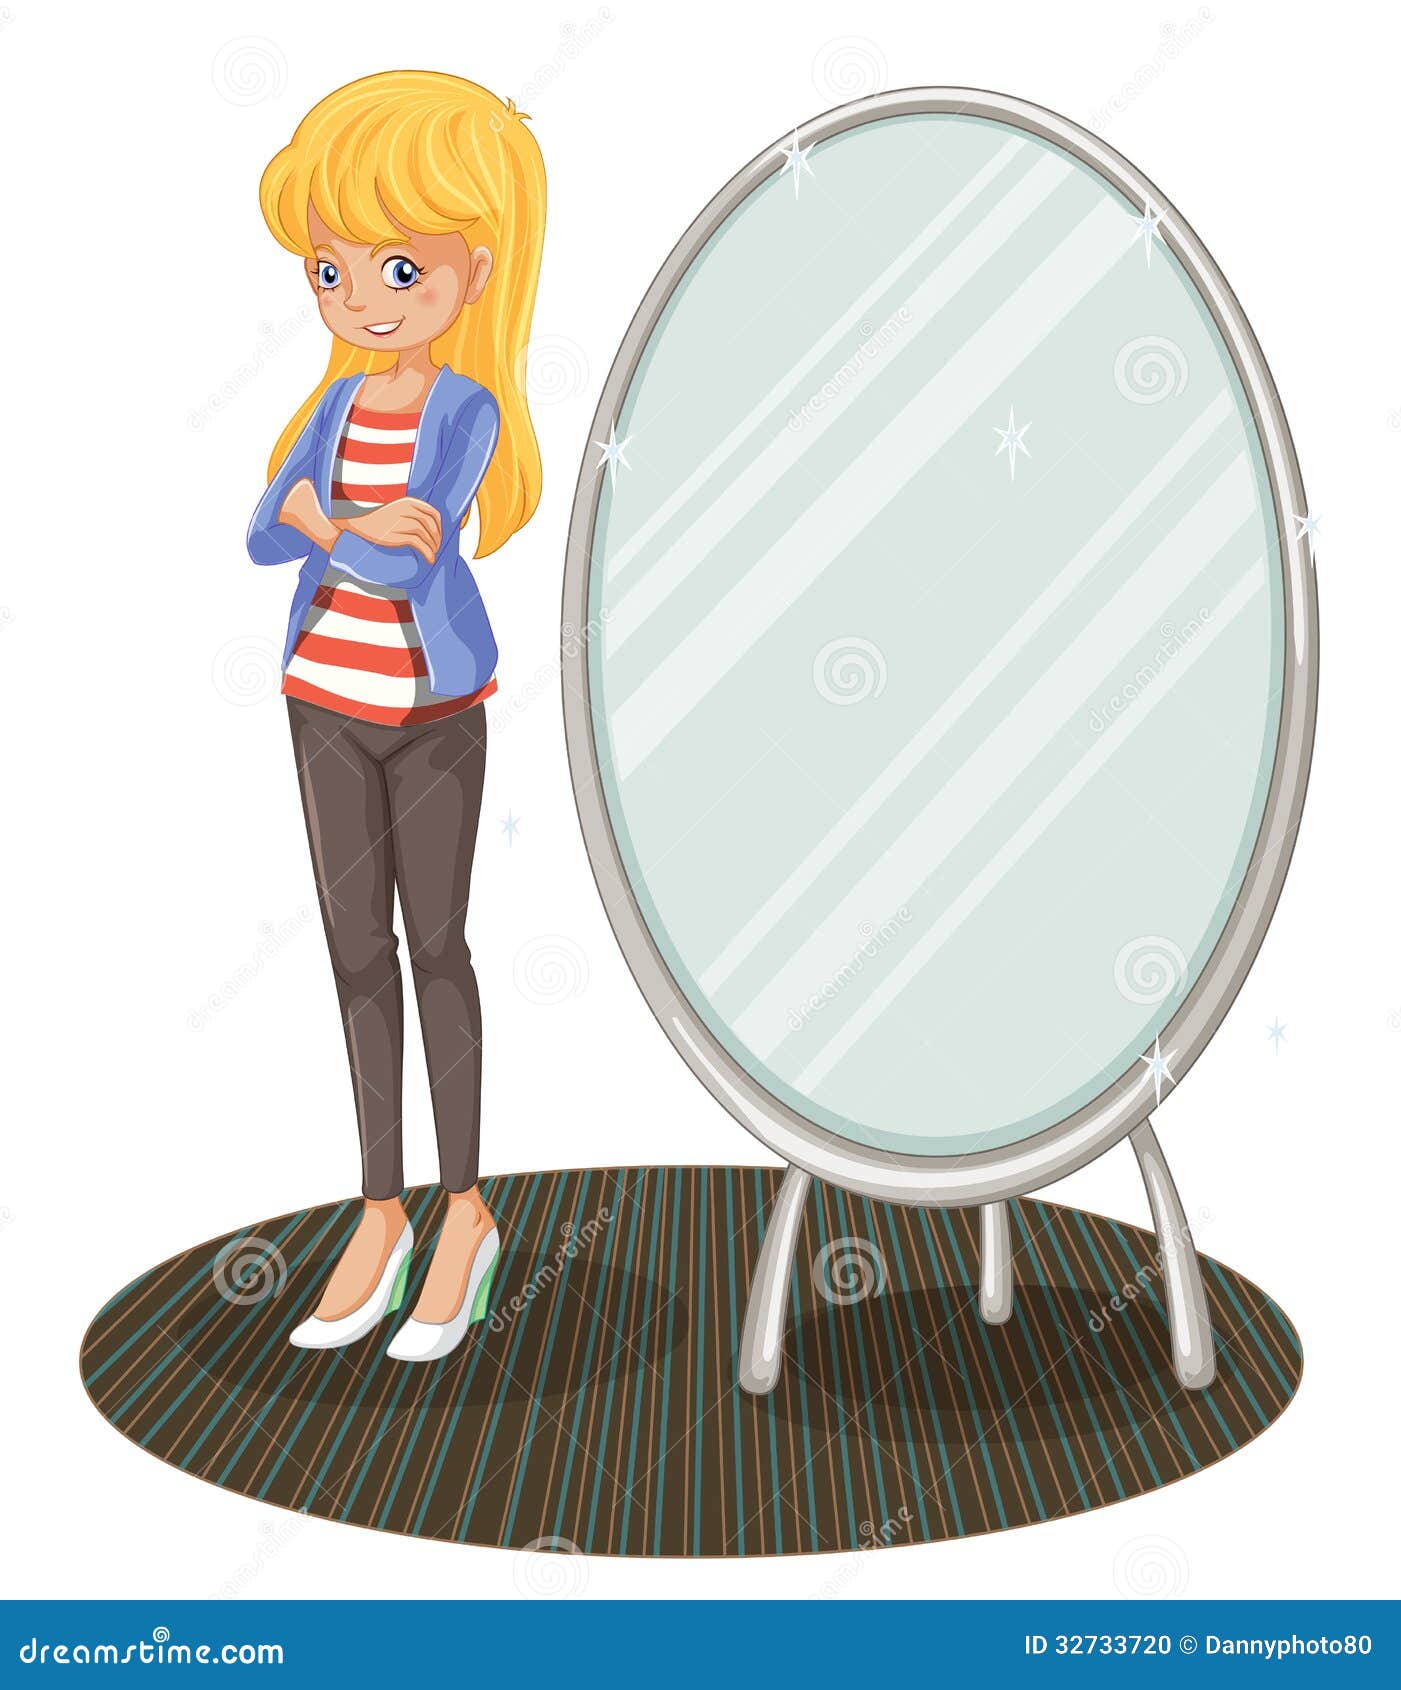 A girl beside a mirror stock vector. Illustration of background - 32733720